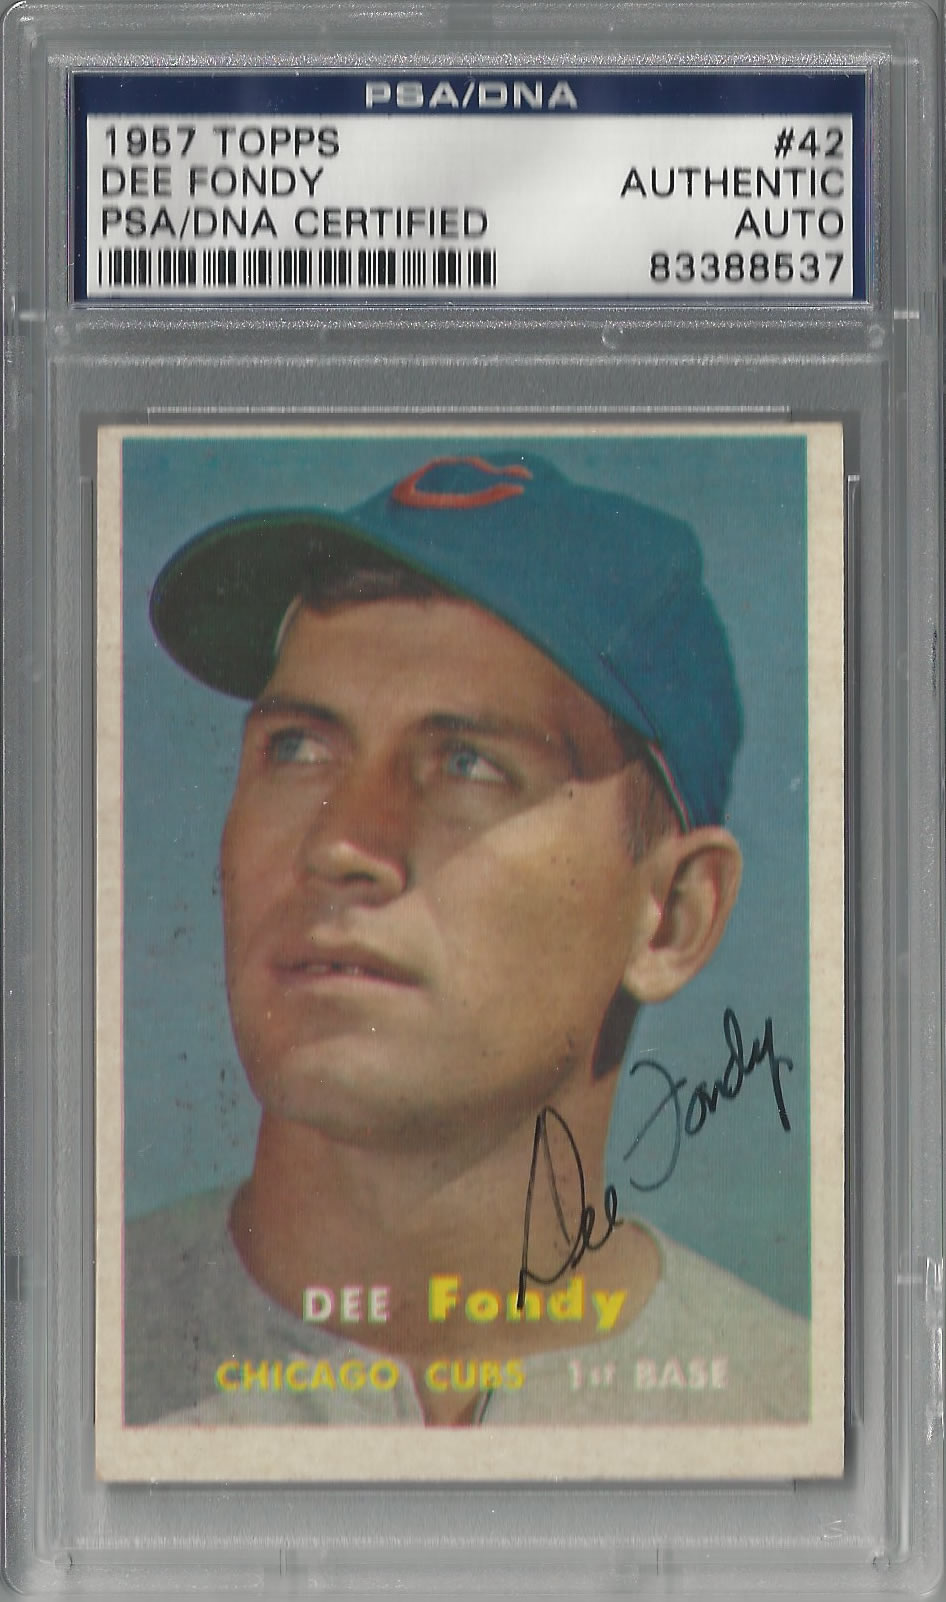 1957 Topps #42 Dee Fondy Chicago Cubs PSA/DNA Certified Authenti